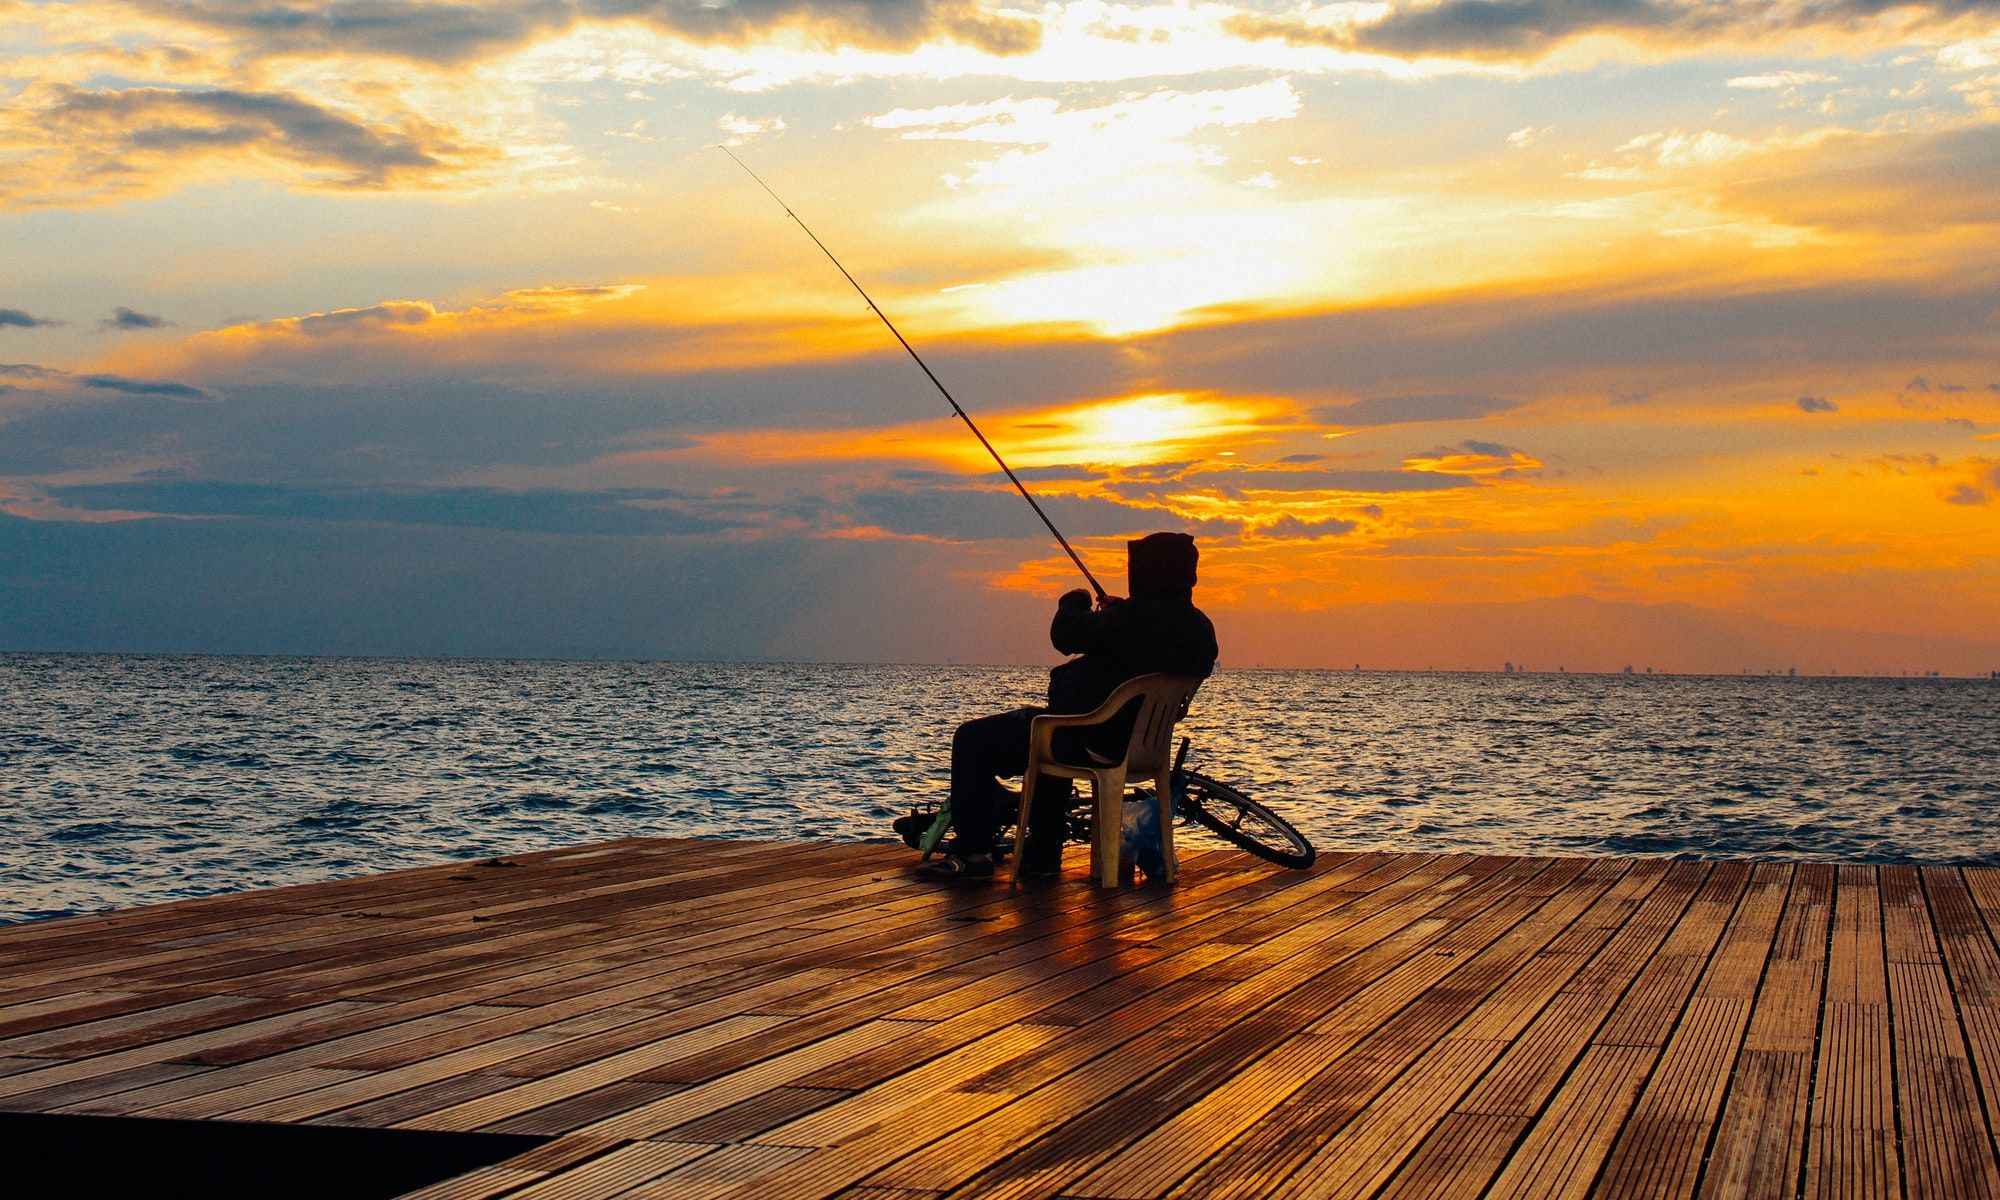 Monroe County, NY Fishing: Great Fishing Opportunities in the Scenic Finger Lakes region